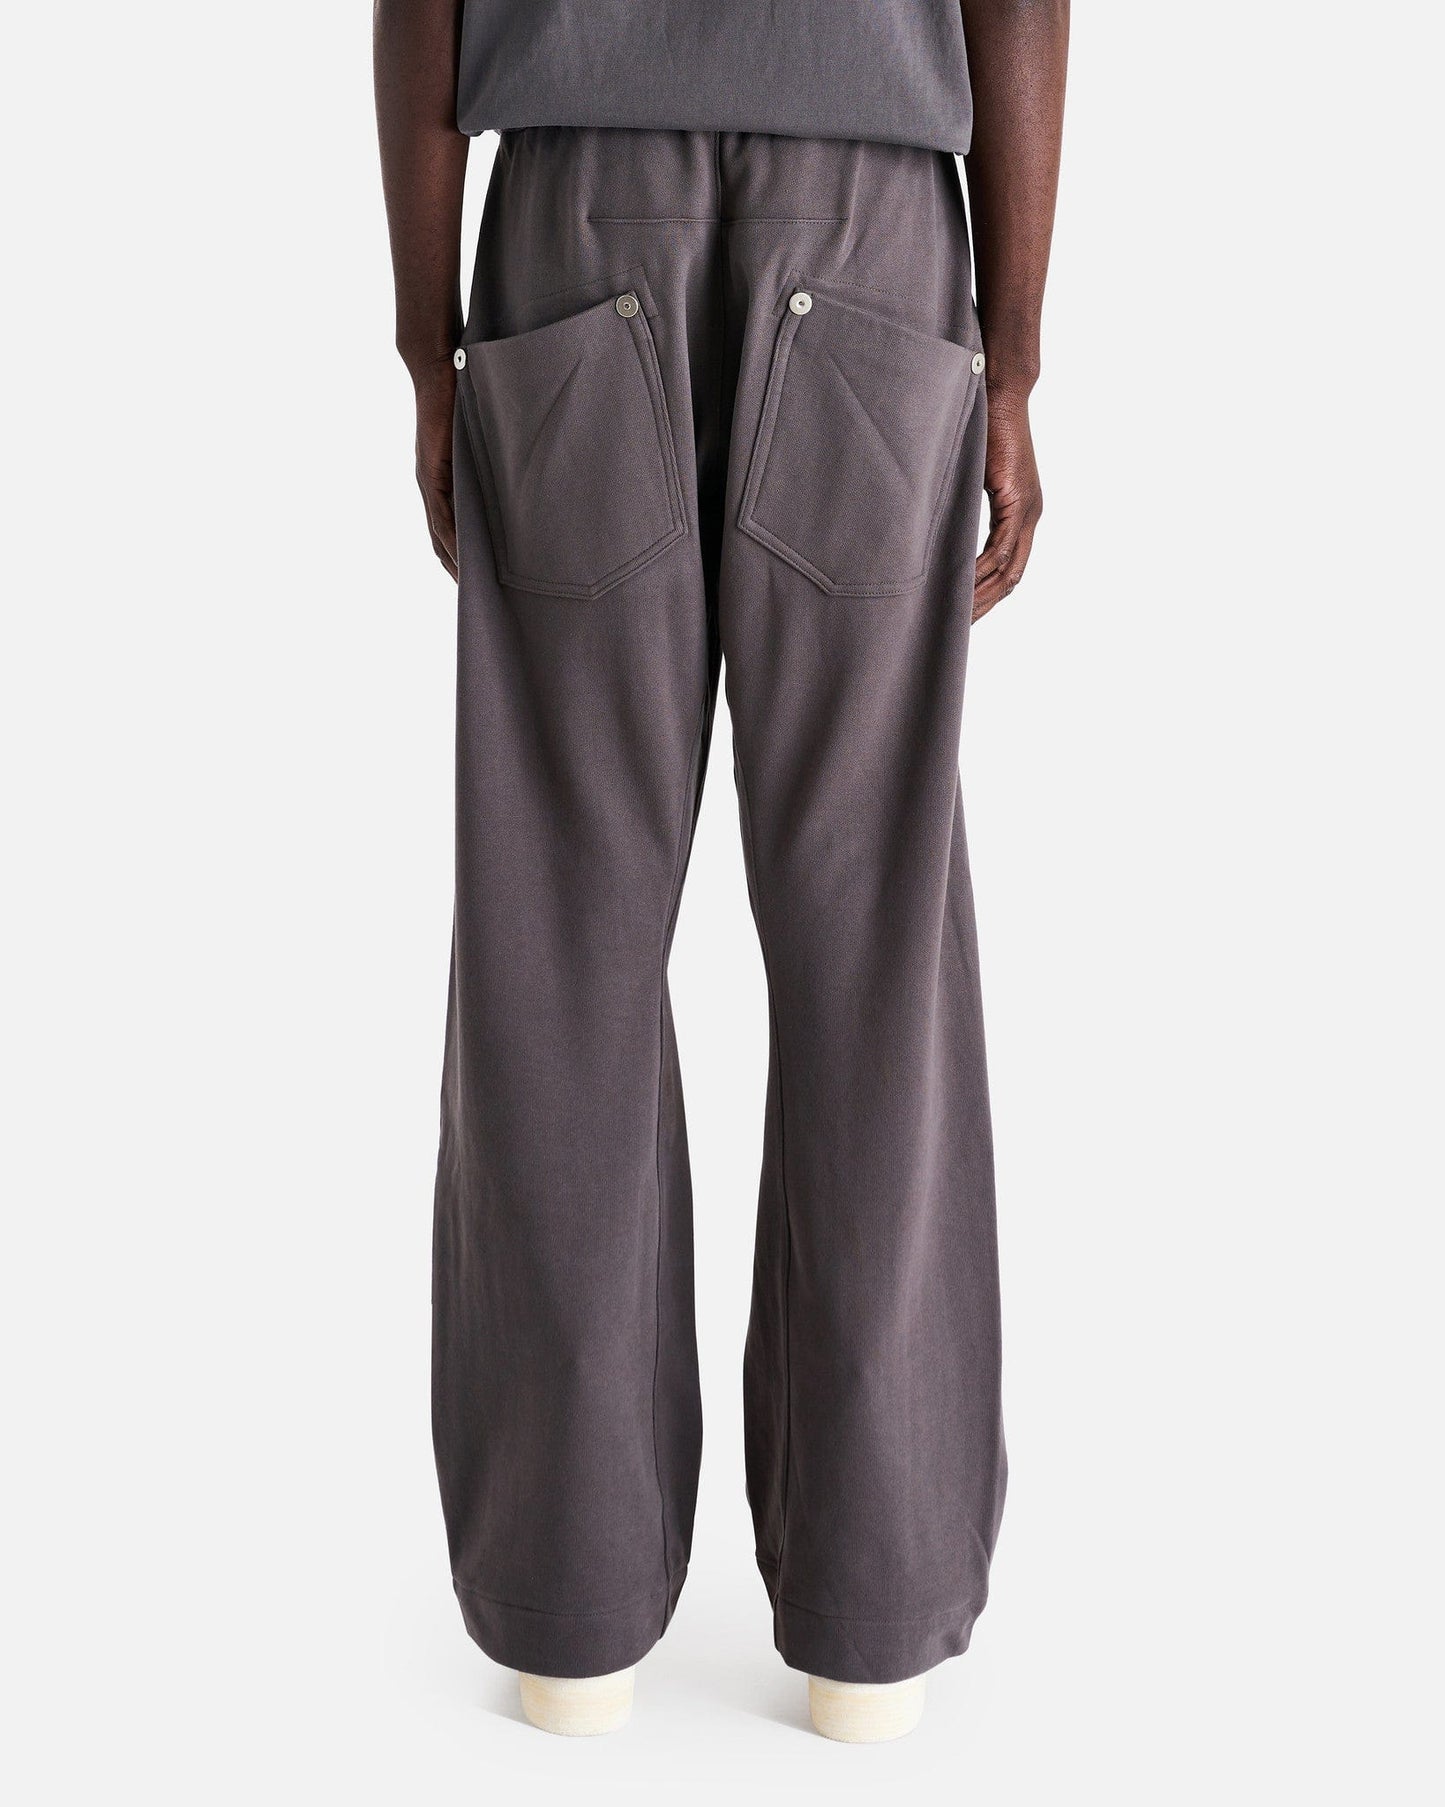 Omar Afridi Men's Pants Twisted Lounge Pants in Charcoal Cotton Jersey